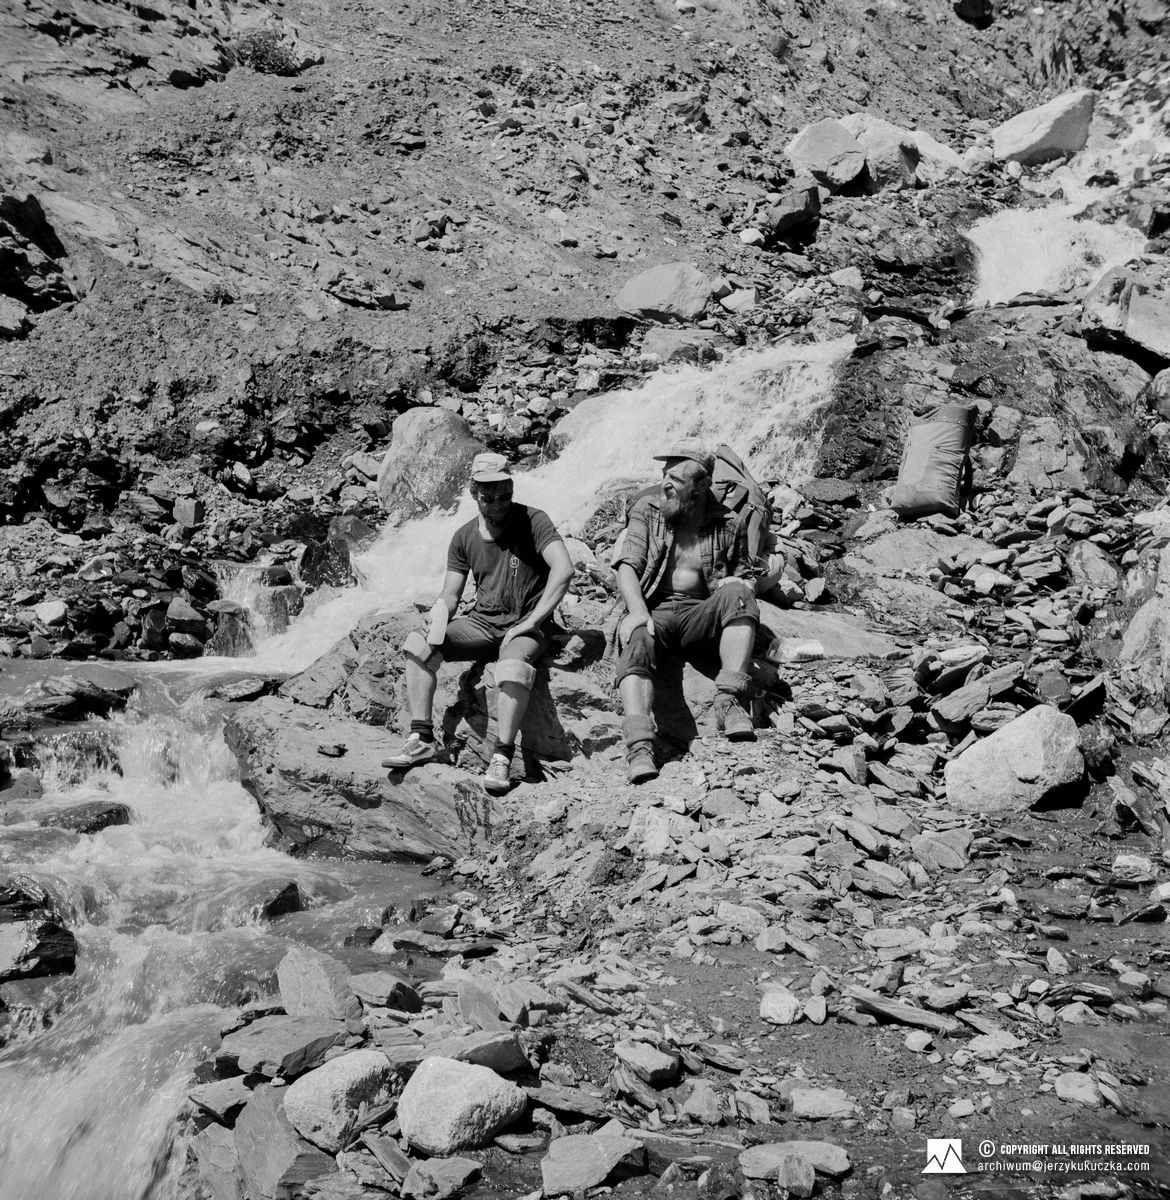 Participants of the expedition by the stream in the Barum Gol valley. From the left: Jerzy Kukuczka and Tadeusz Piotrowski.